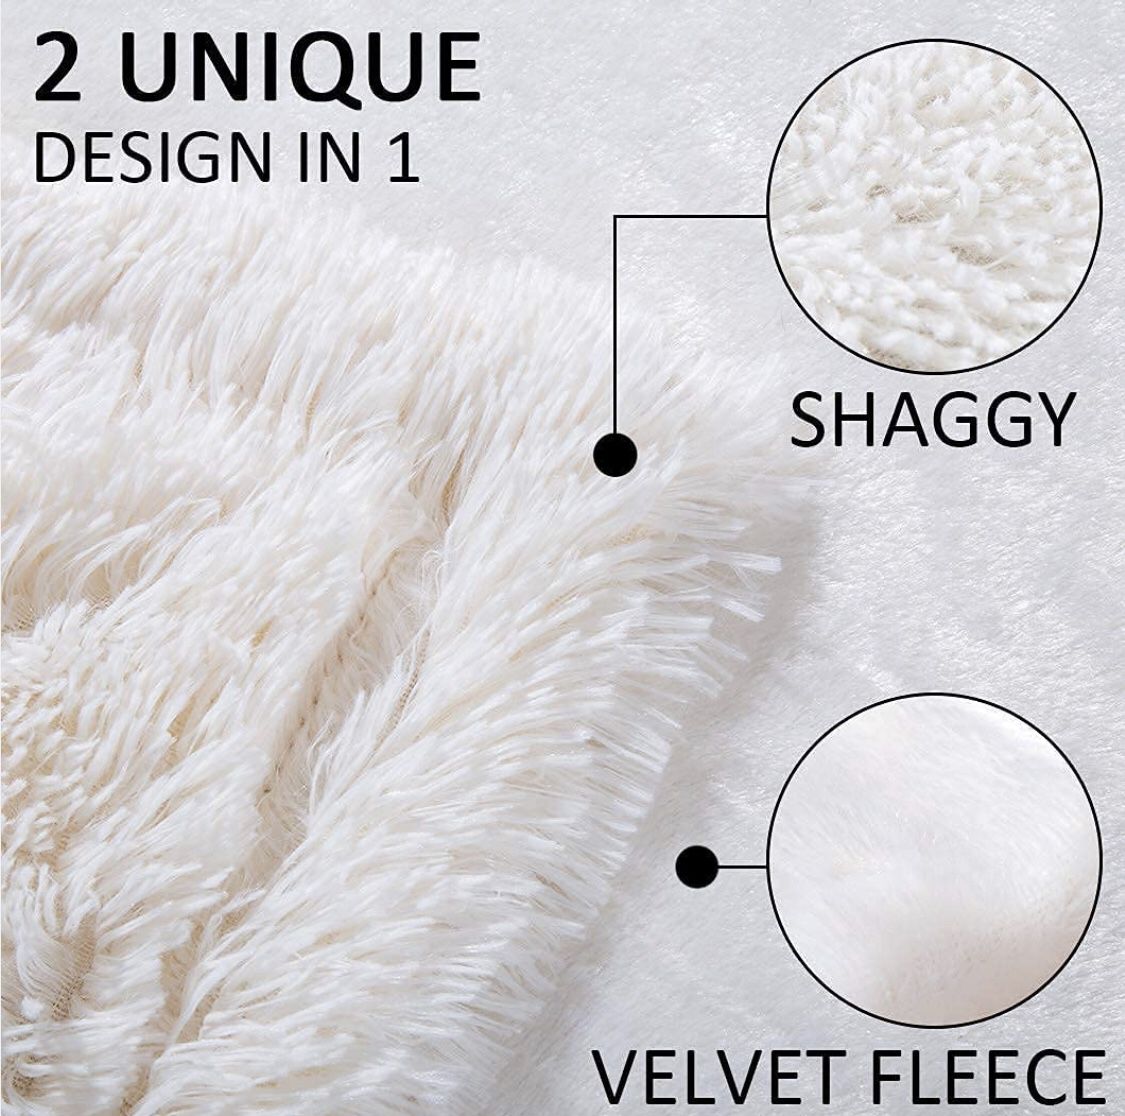 Thick Twin Size Faux Fur Throw Blanket(Cream White,60" x 80"),Whithout Pillows,Winter Lightweight Plush Fuzzy Soft Cozy Microfiber Comfy Bed Blanket f